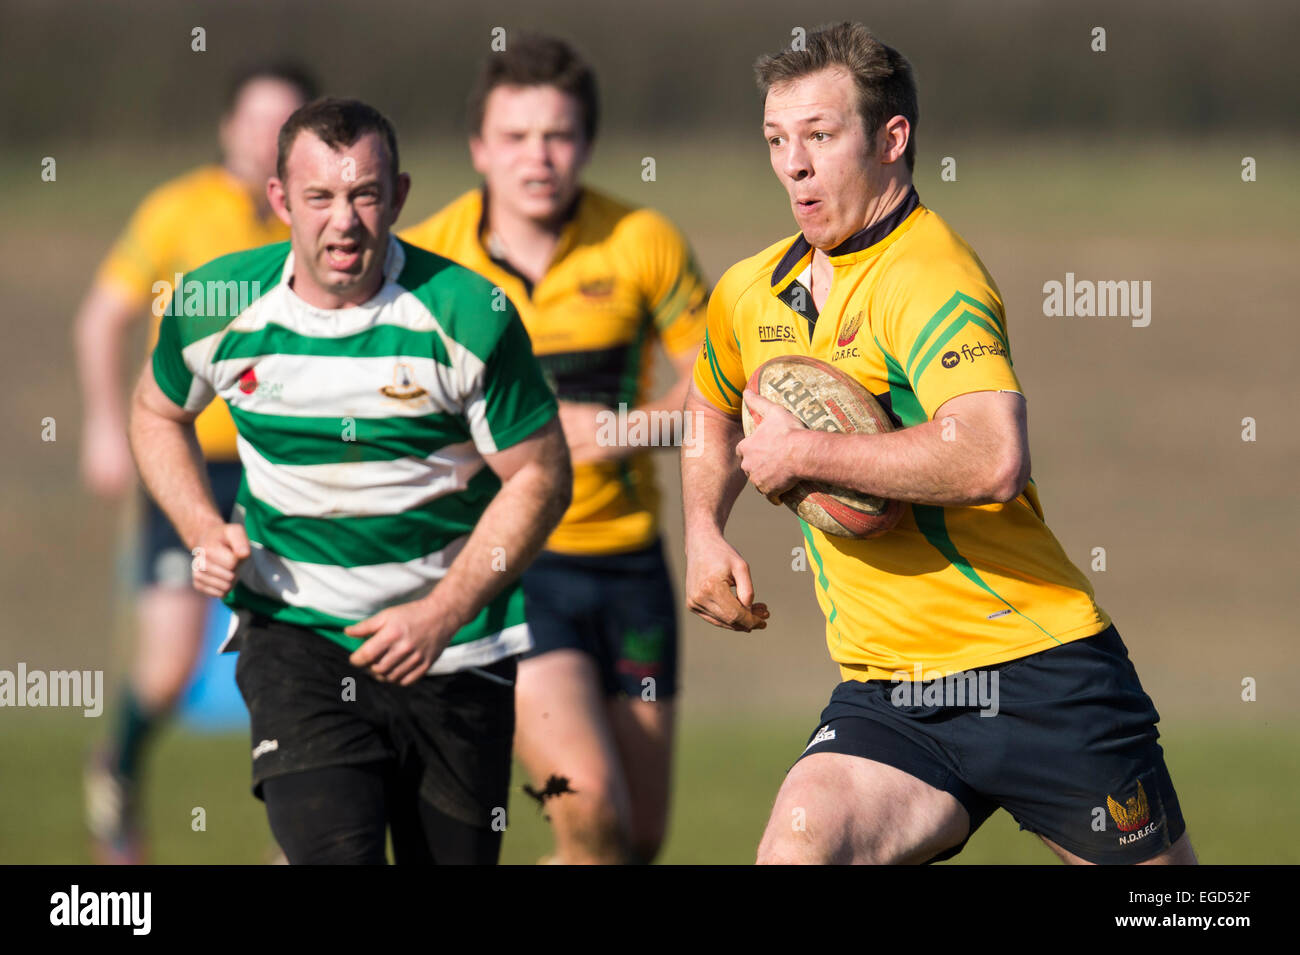 Rugby player in action running with the ball. Stock Photo